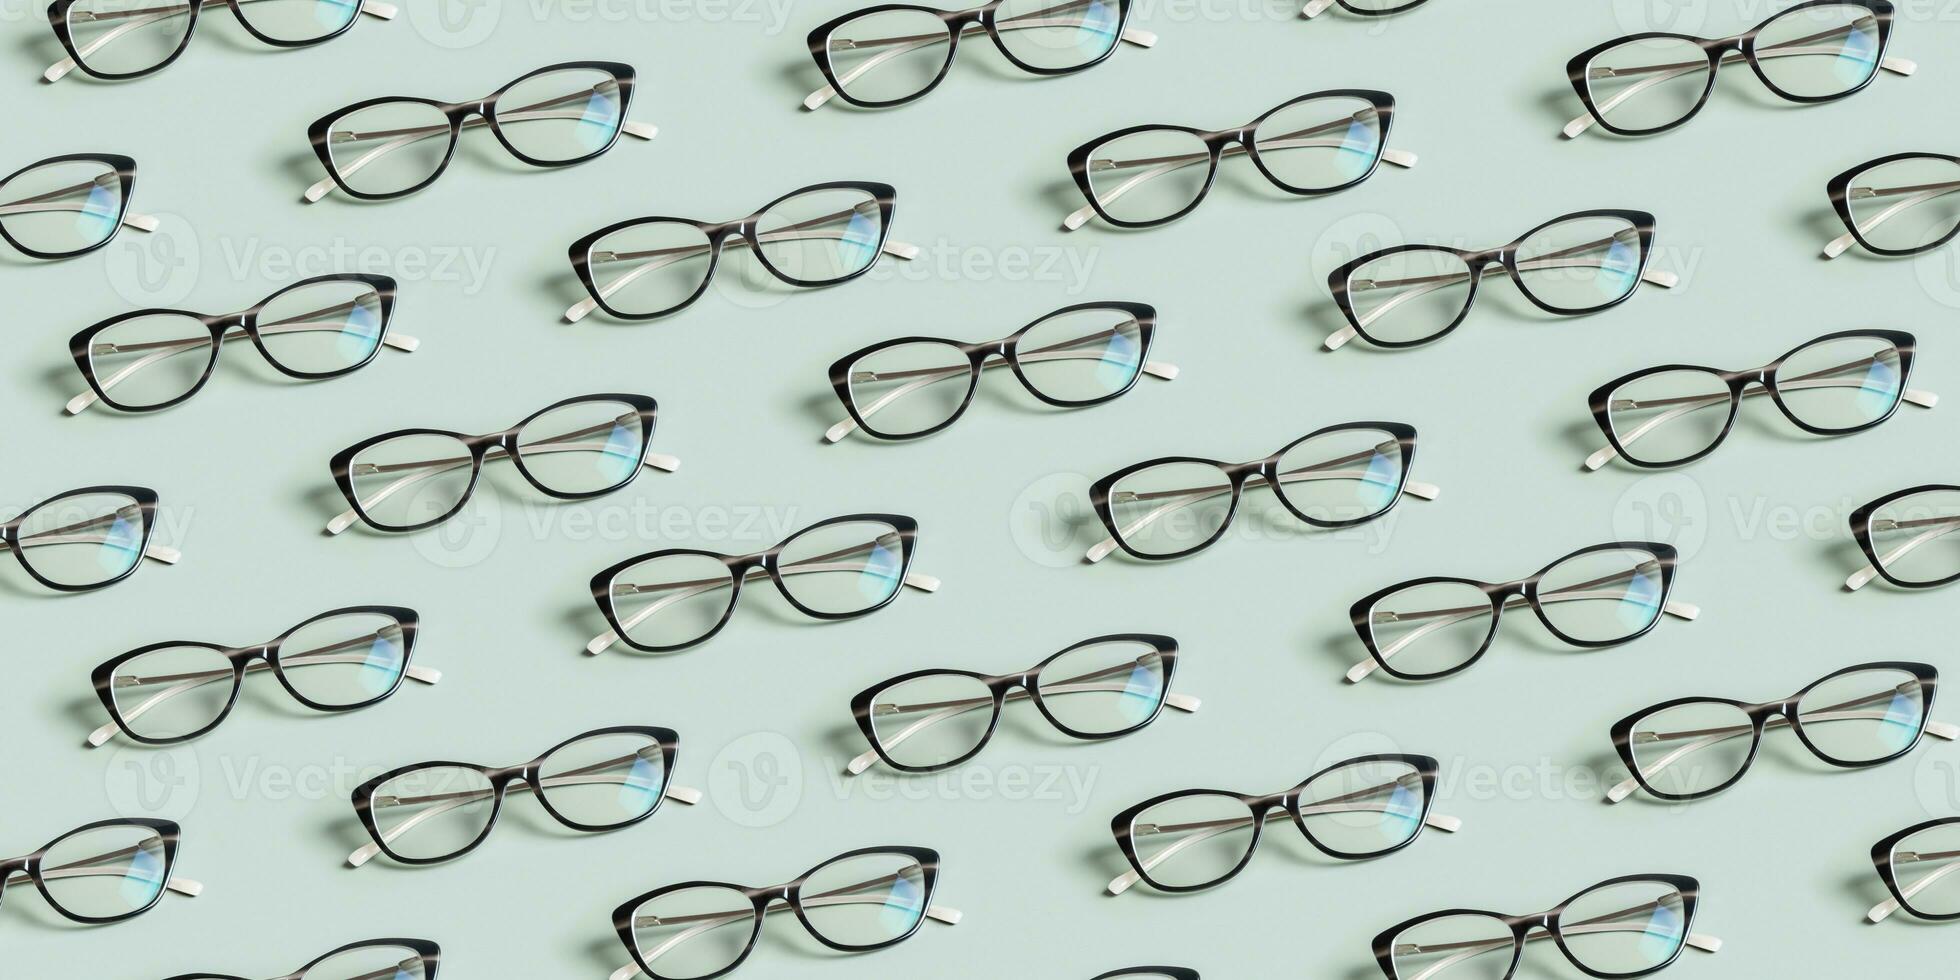 Glasses for vision on a green background. Optical store, vision test, stylish glasses concept. Banner with pattern photo